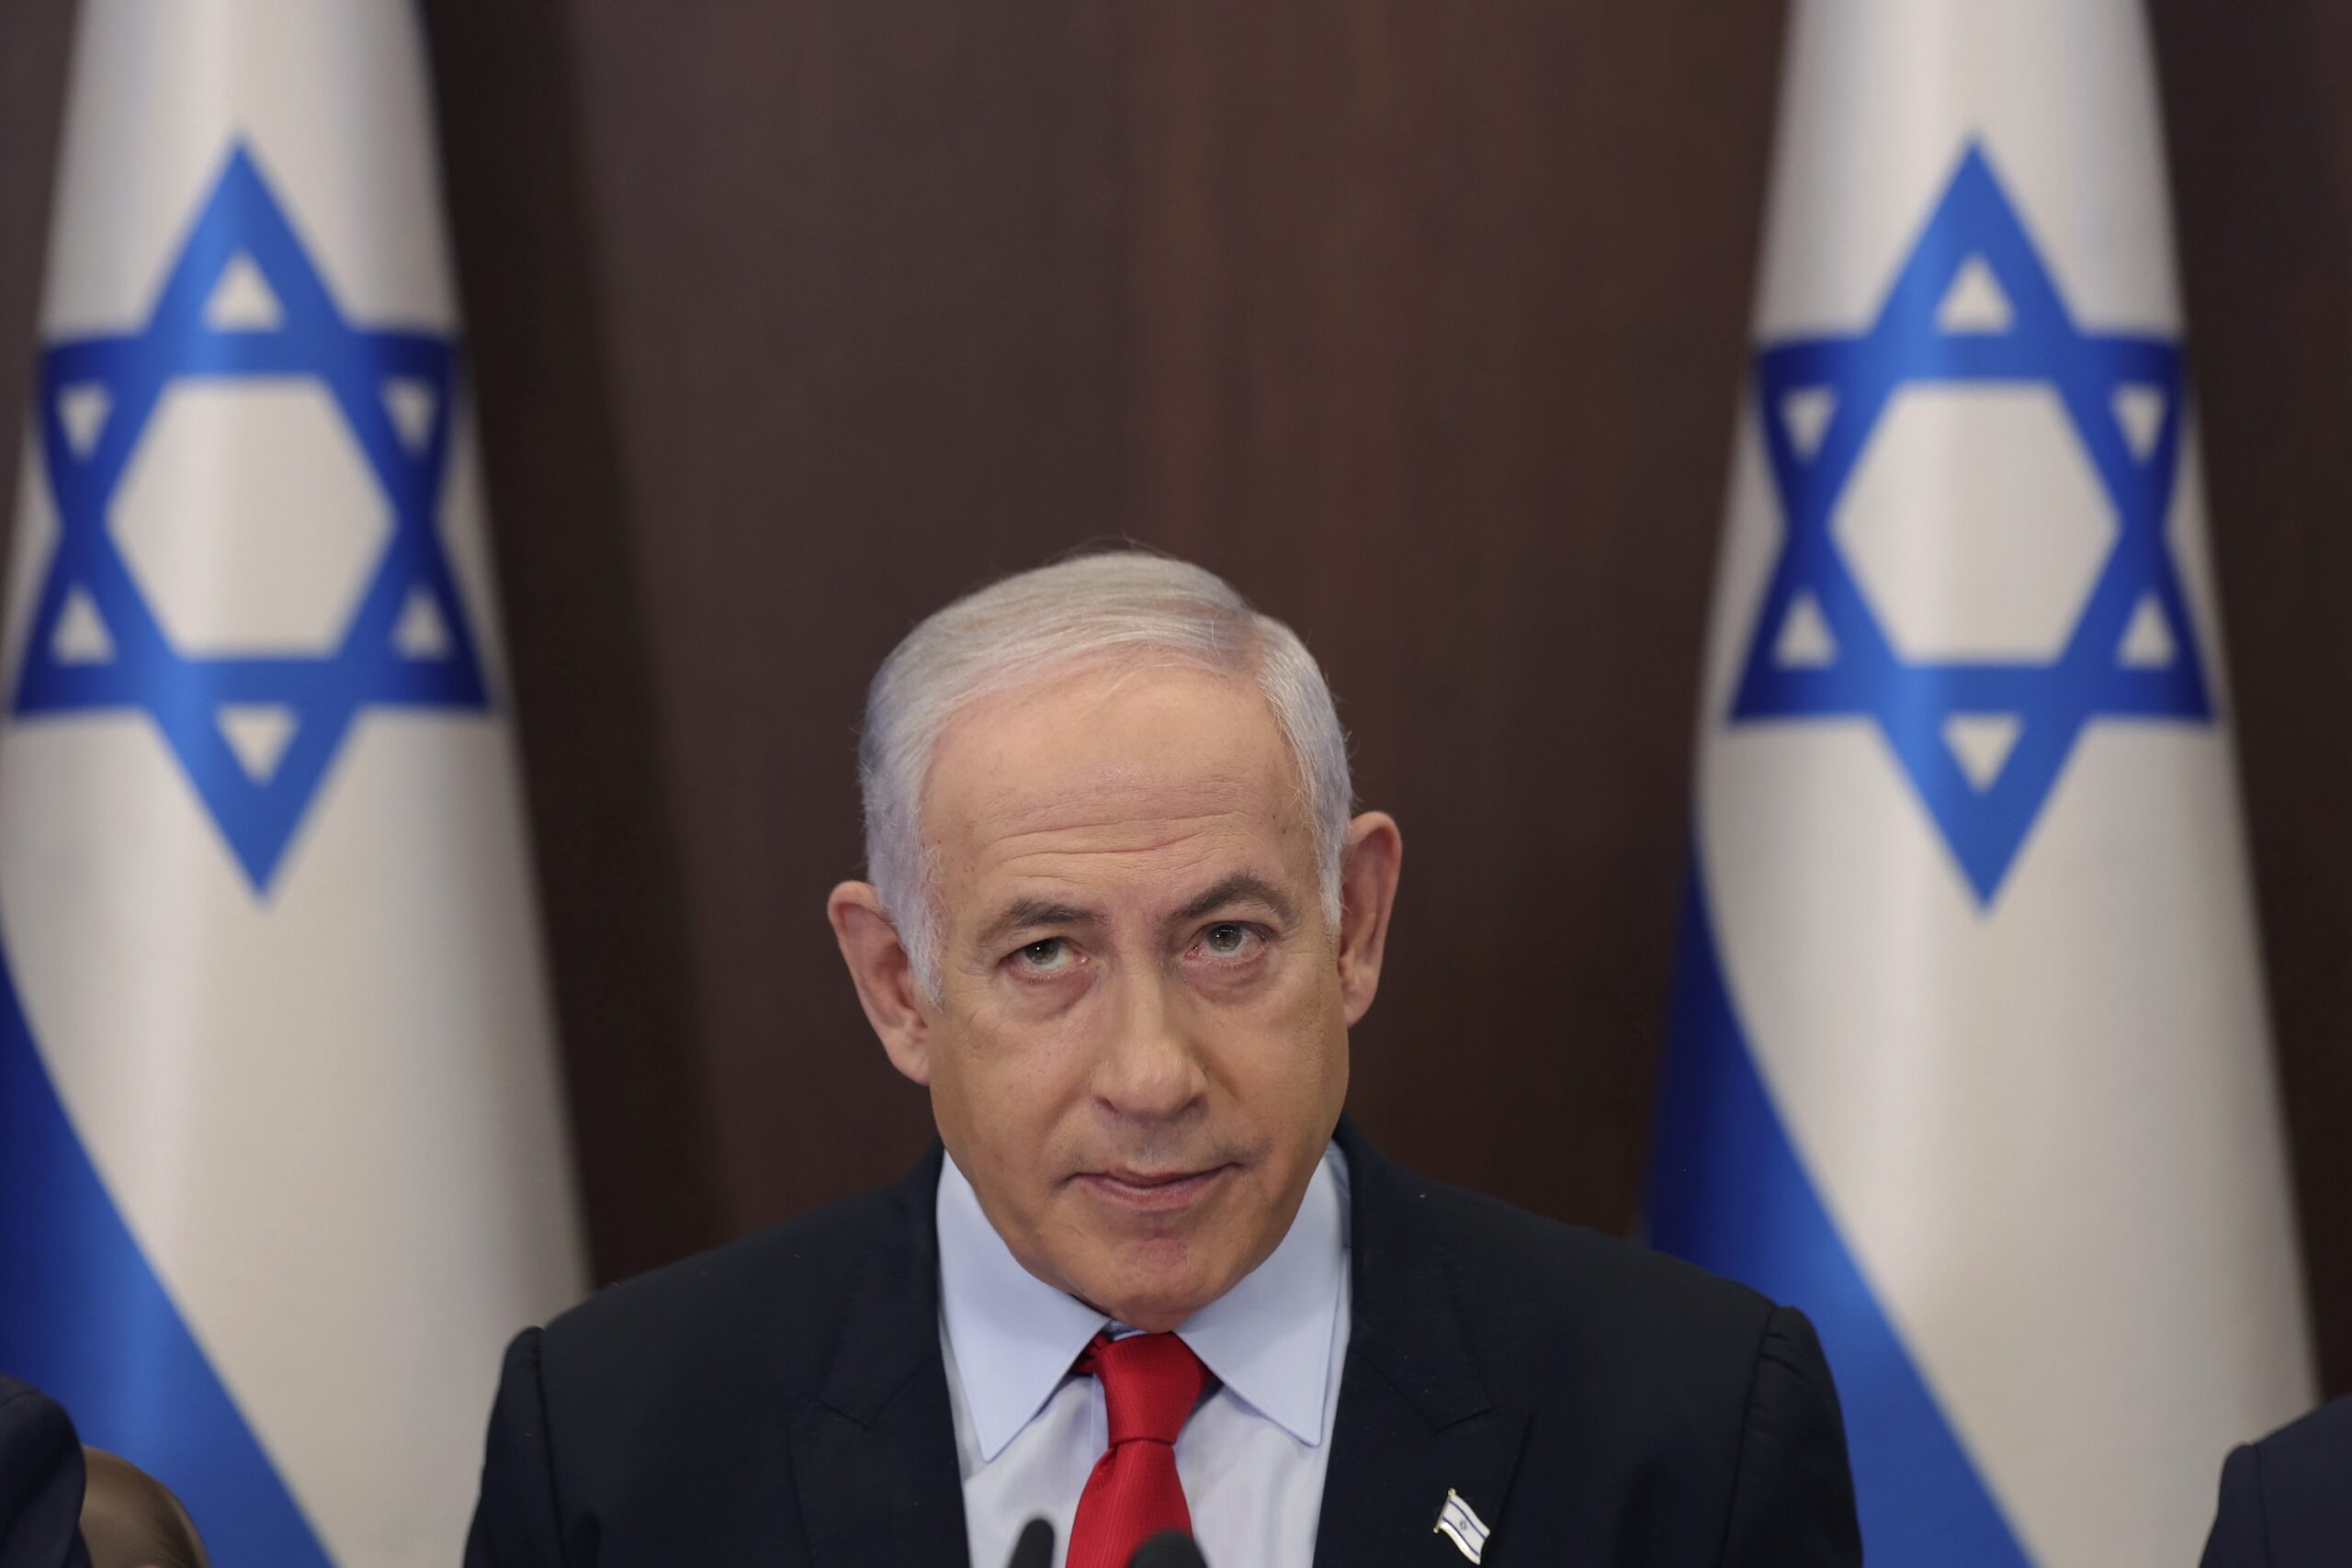 Israeli Prime Minister Benjamin Netanyahu attends the weekly cabinet meeting at the prime minister's office in Jerusalem